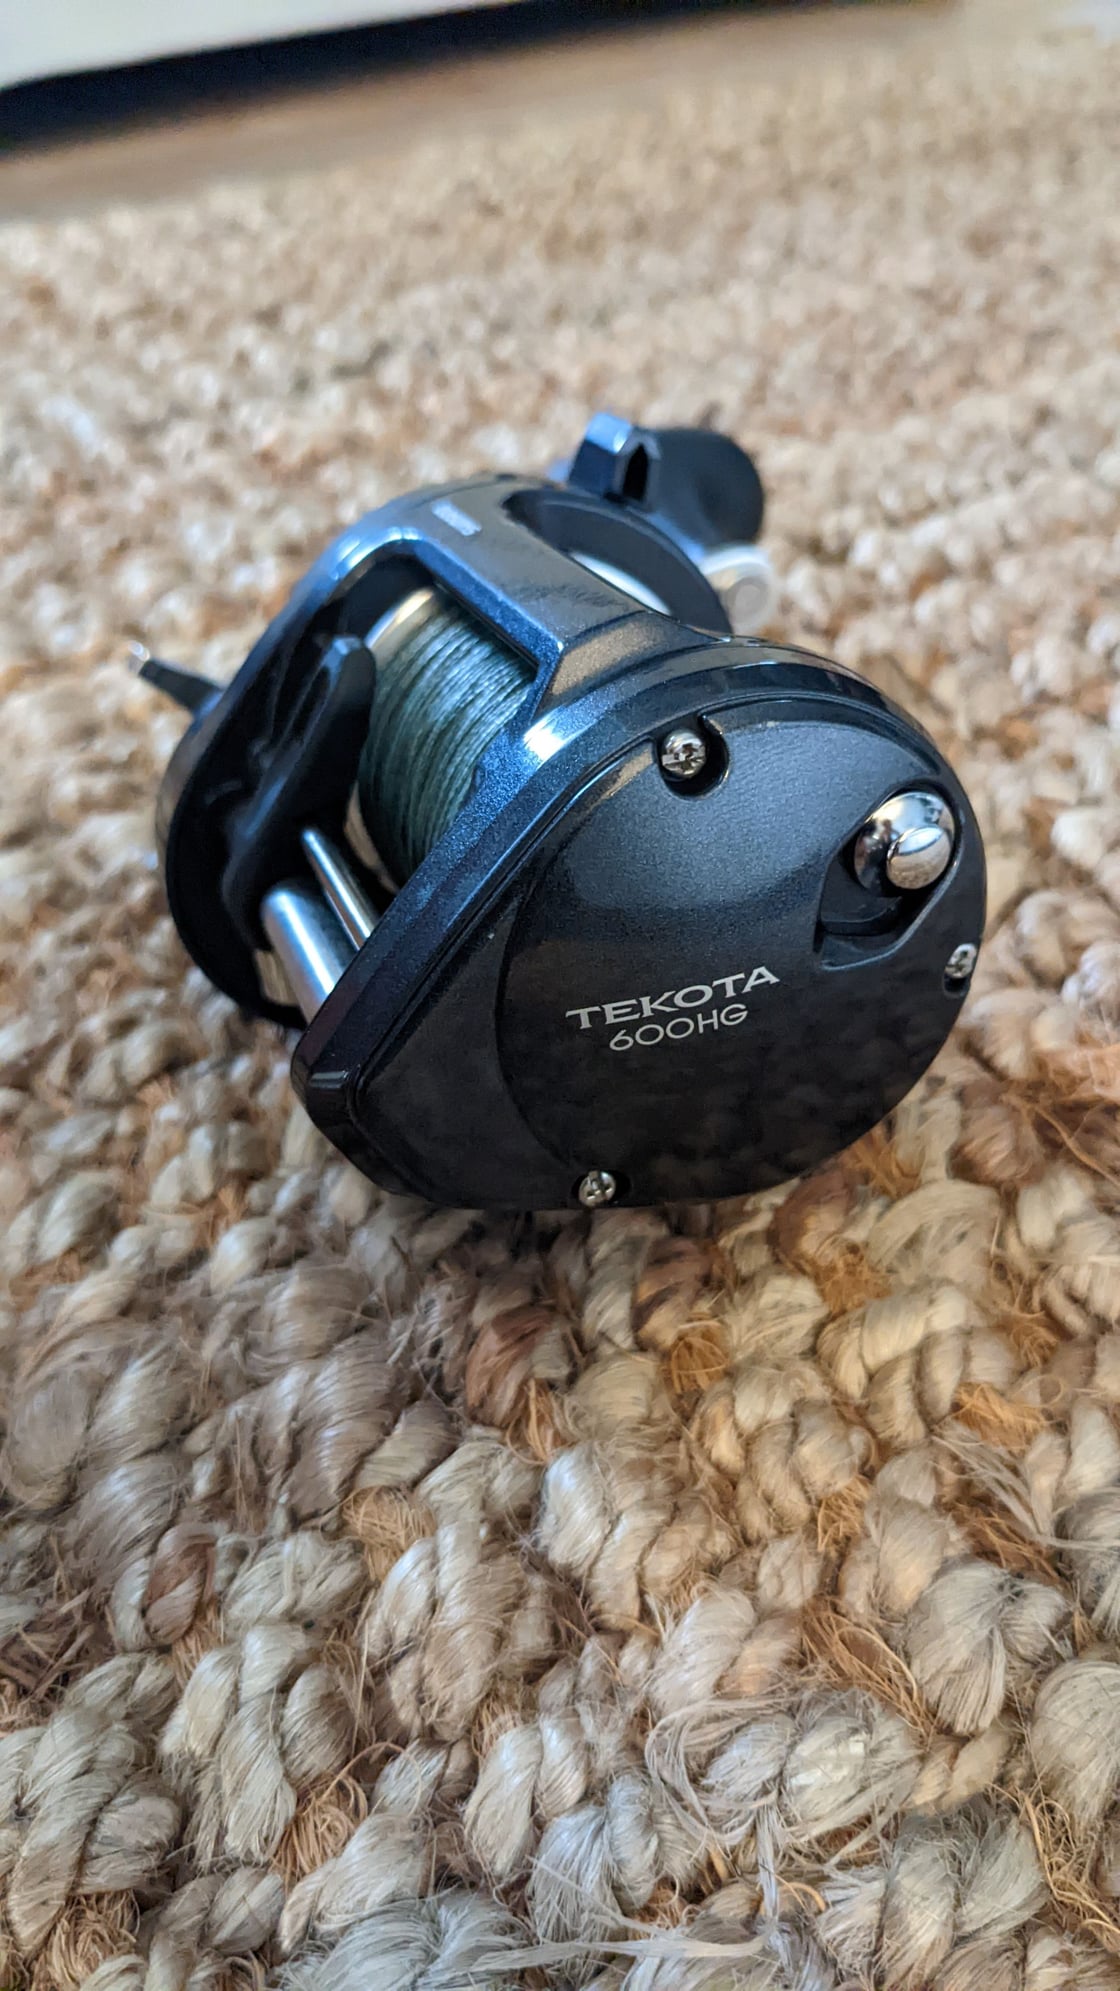 Shimano Tekota 600 HG for sale - The Hull Truth - Boating and